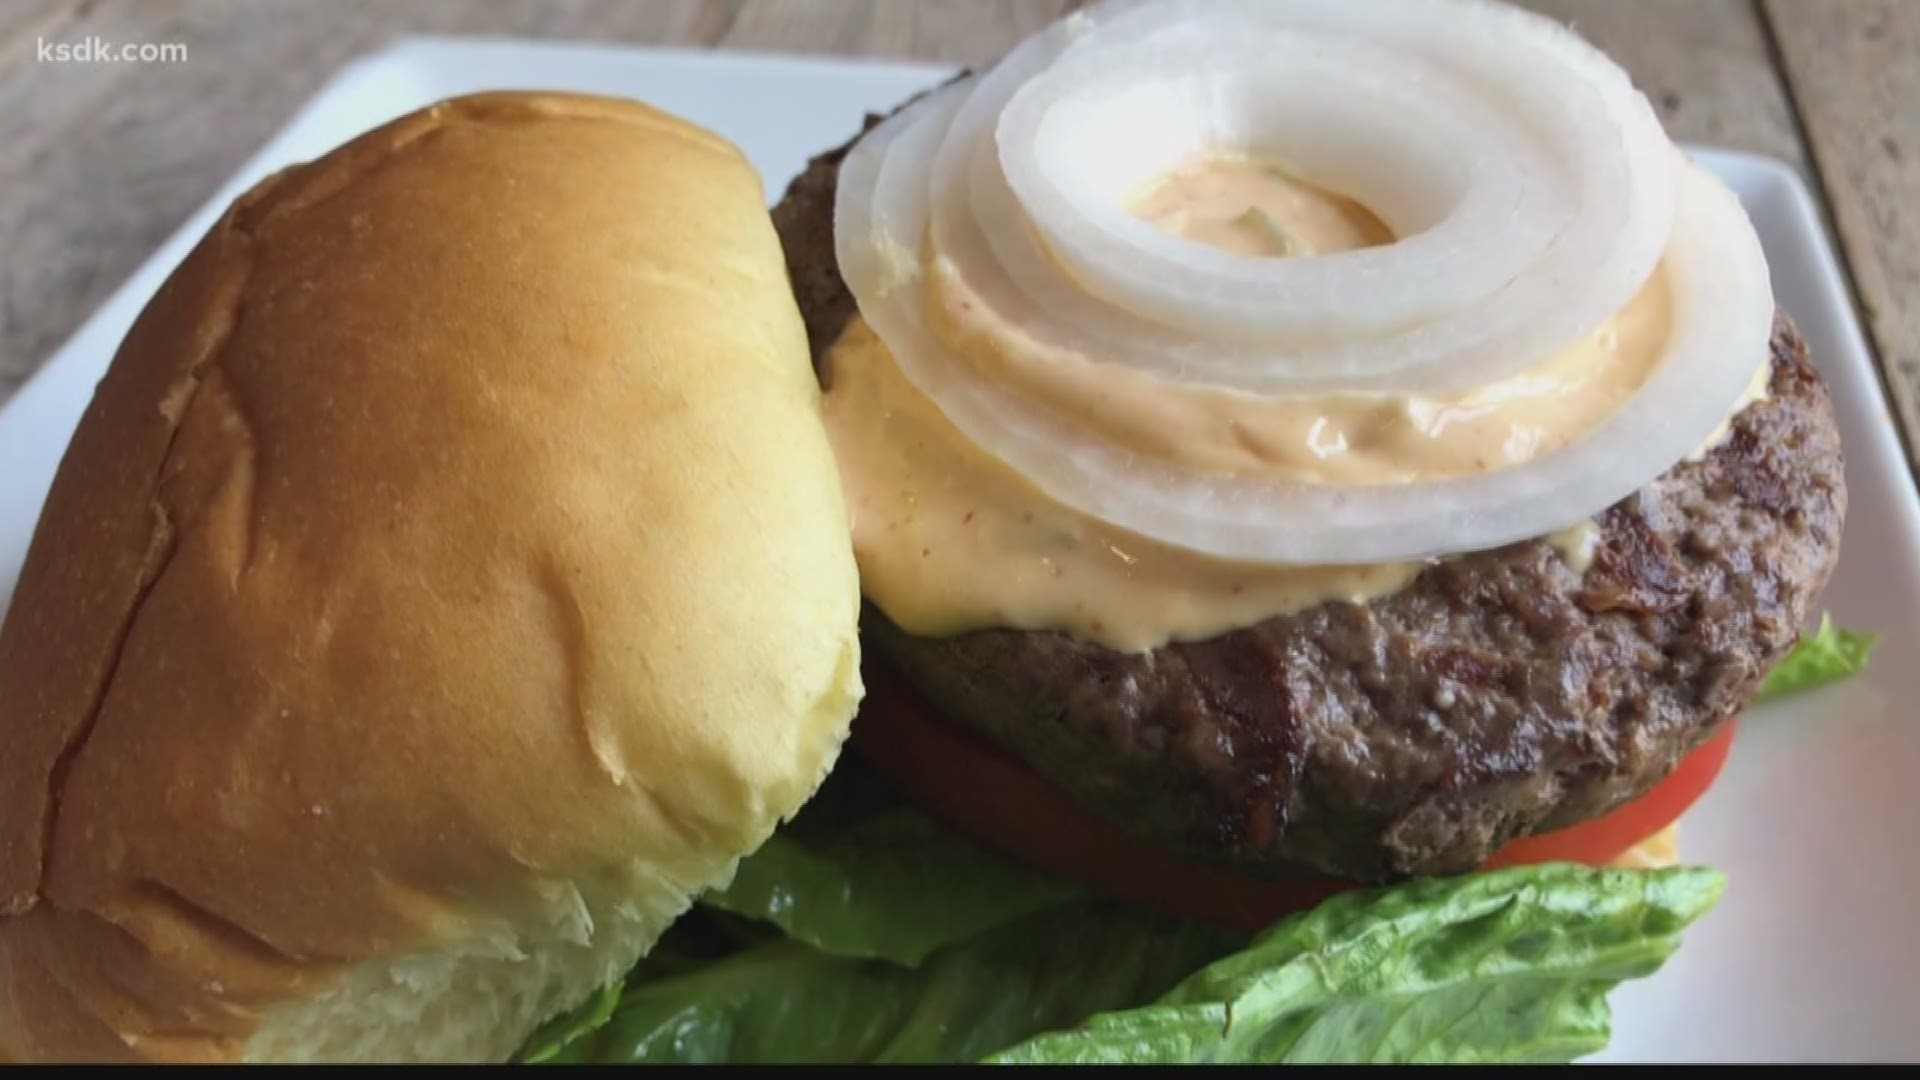 Give your burger some bite with this Zesty Burger Sauce recipe from Schnucks!